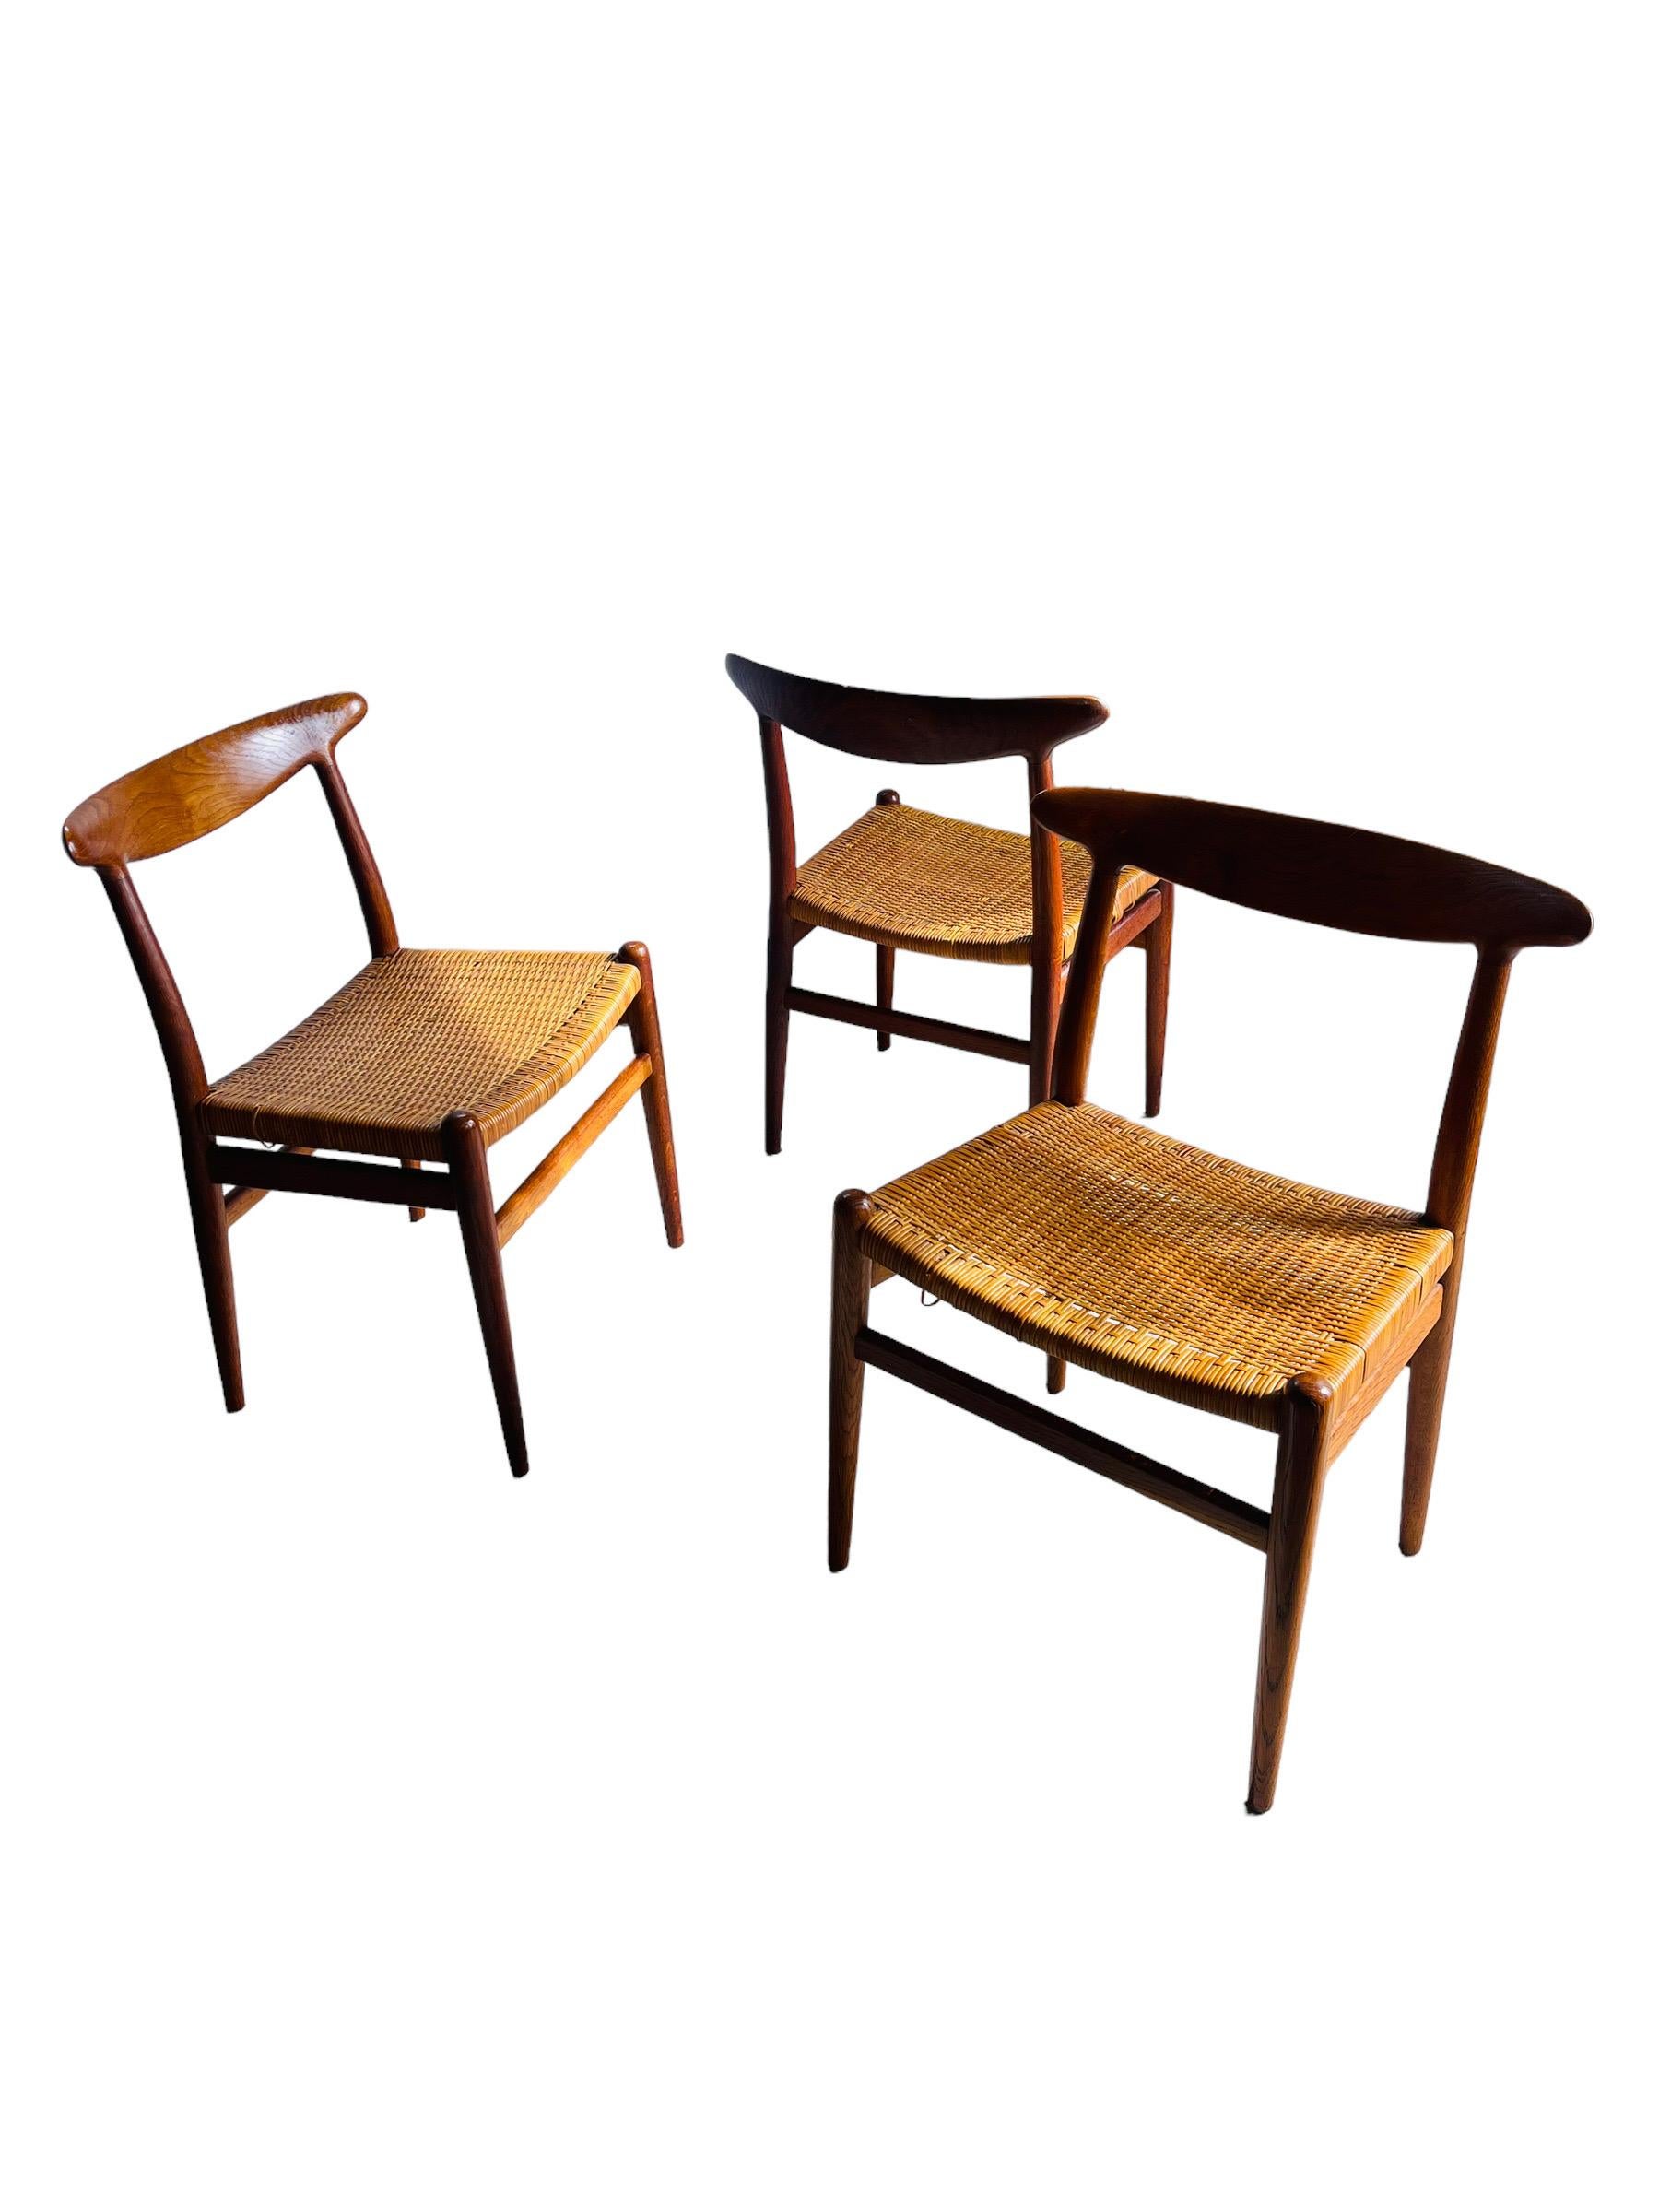 Classic Set of 3 W2 dining chairs by Hans J. Wegner / Denmark, oak and teak construction, stamped C M Madsens. In original vintage condition with patina. 

W 22” x D 15” x H 30” x SH 17”.